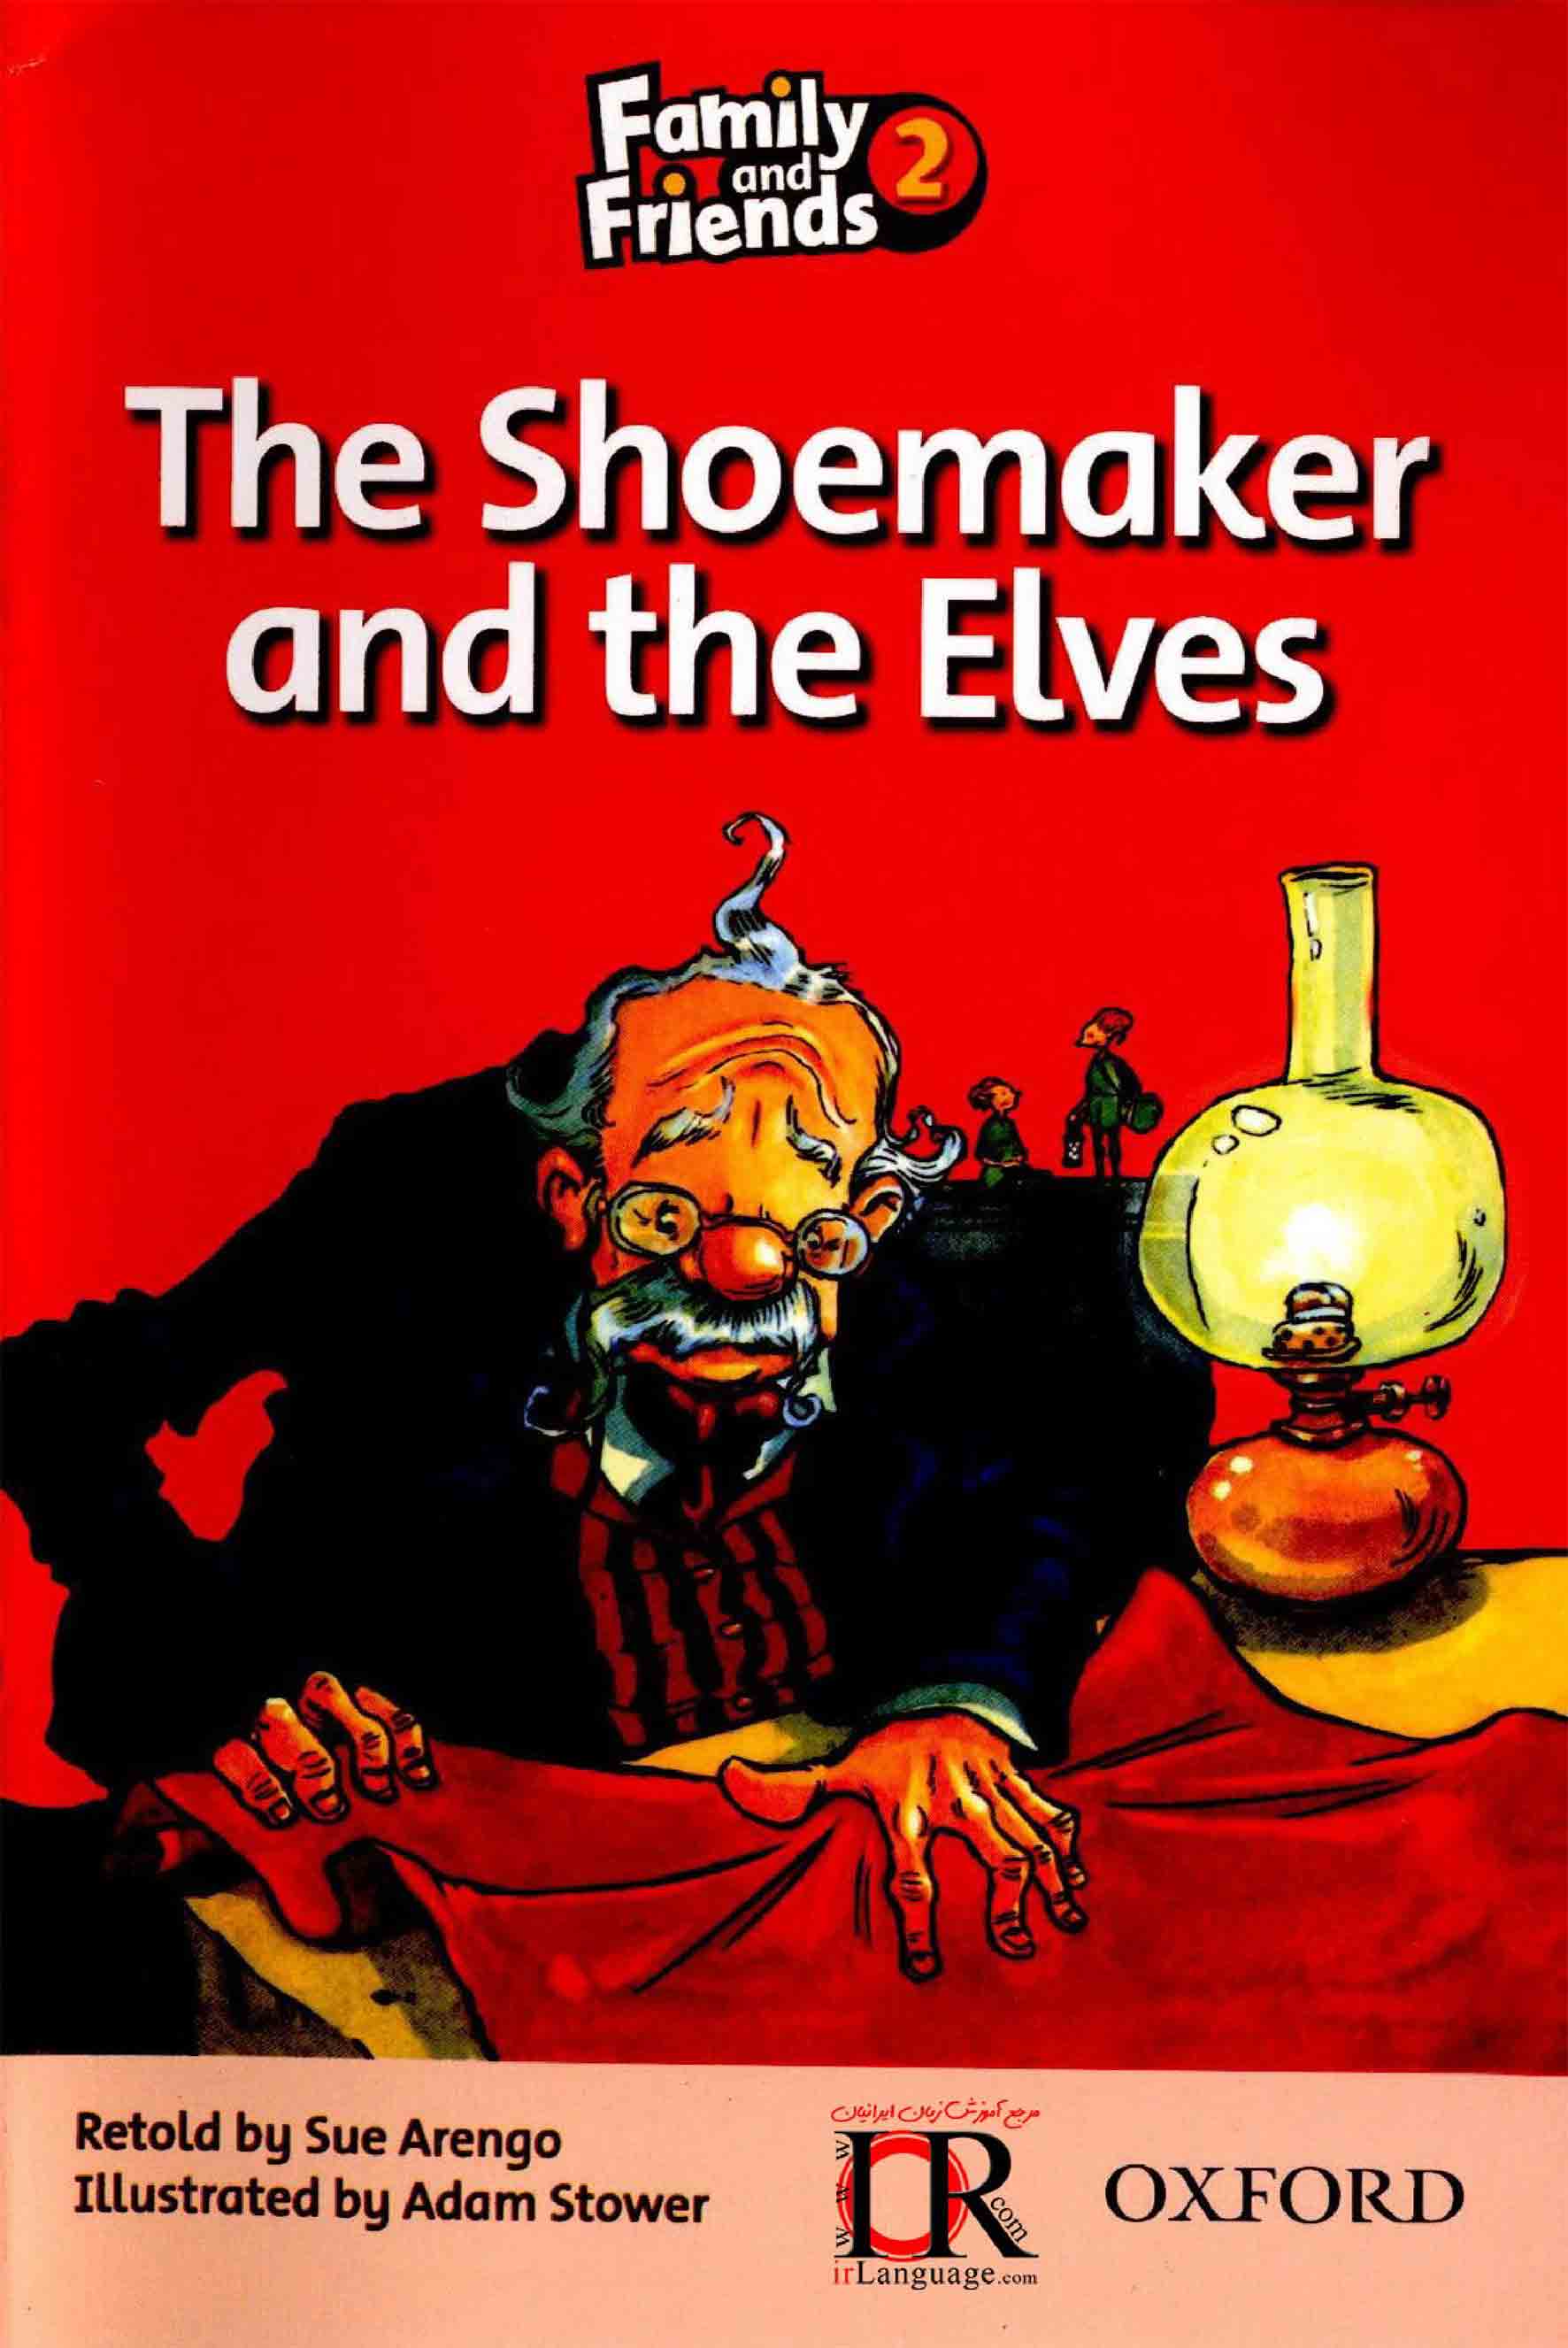 The Shoemaker and The Elves